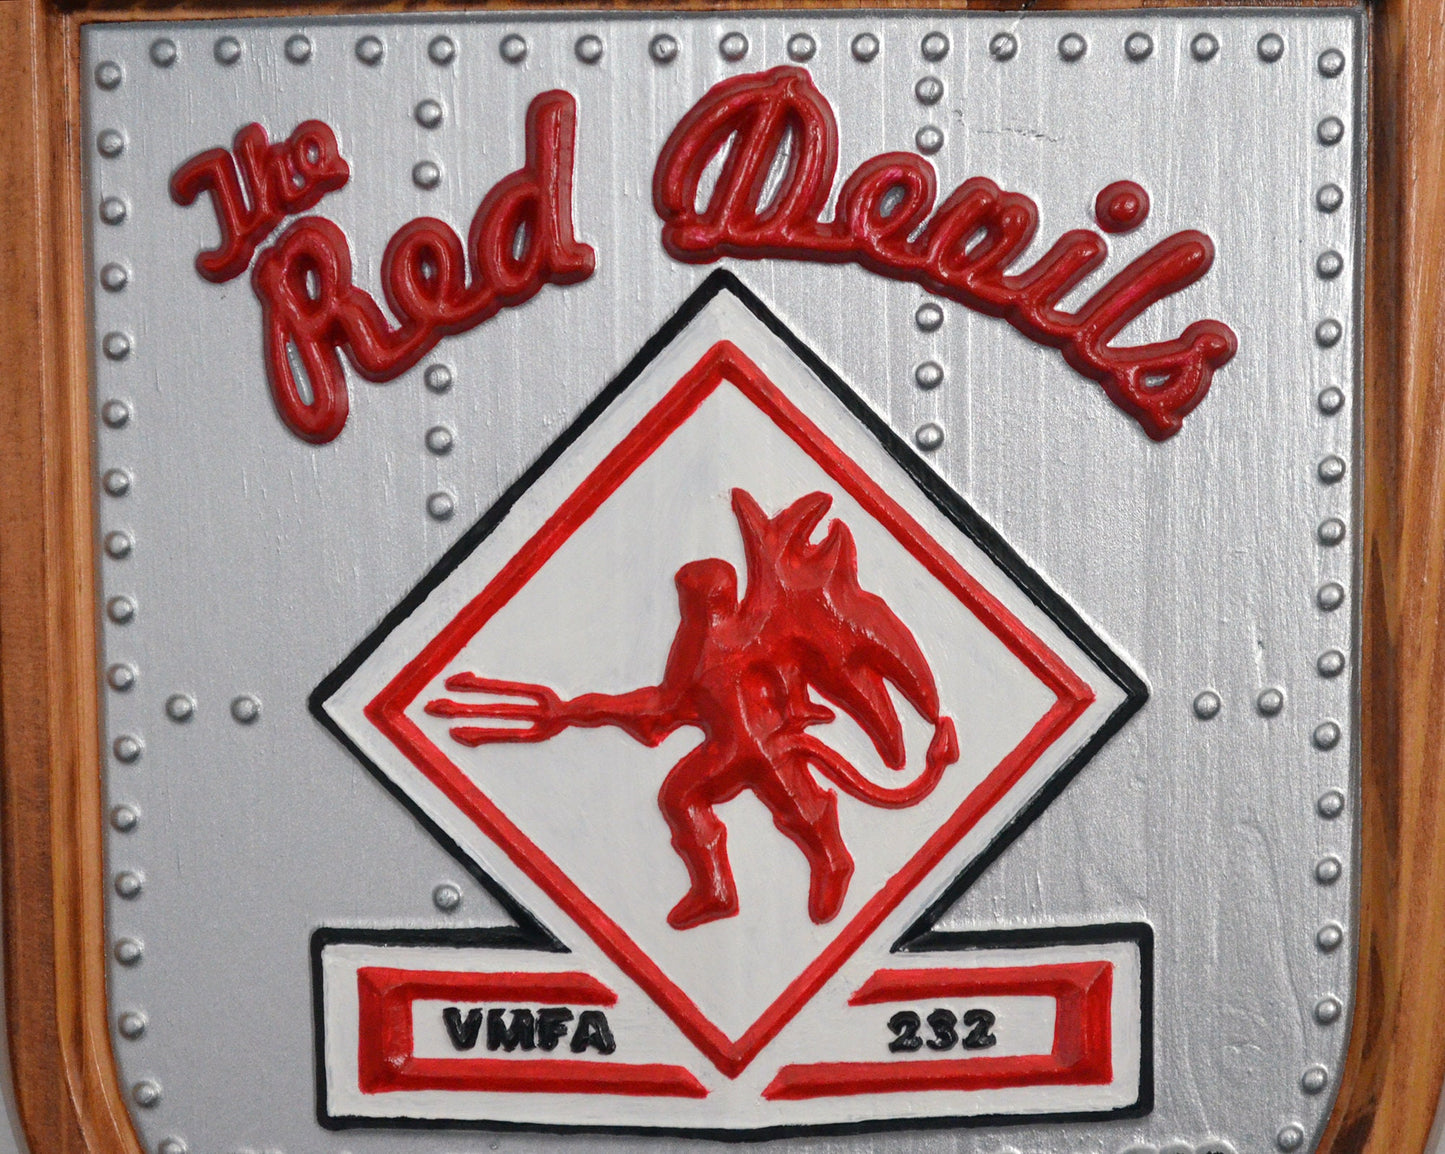 USMC Fighter Attack Squadron VFMA-232, Red Devils, CNC 3d Wood Carving, Painted Military Plaque